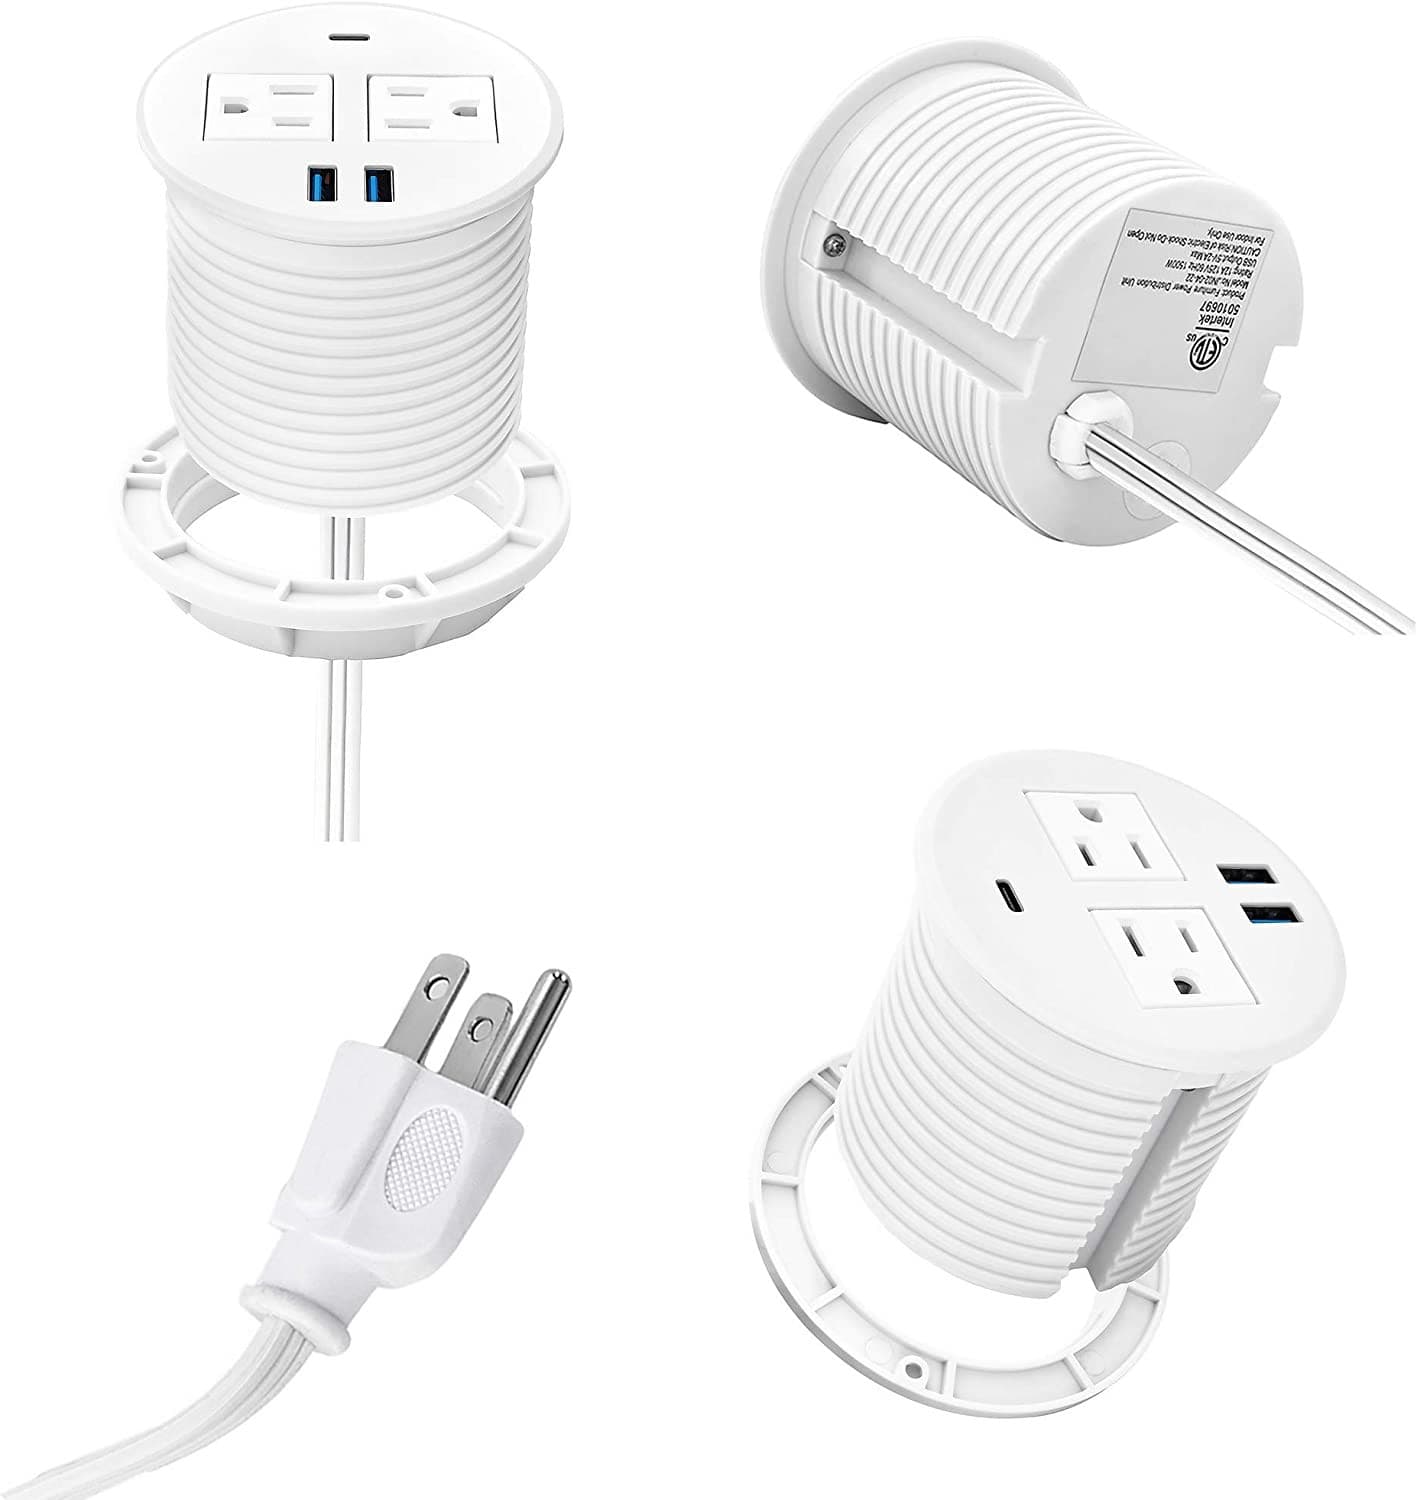 Counter Pop Up With 2 AC Plugs and 3 USB Charging Ports - Sonic Electric